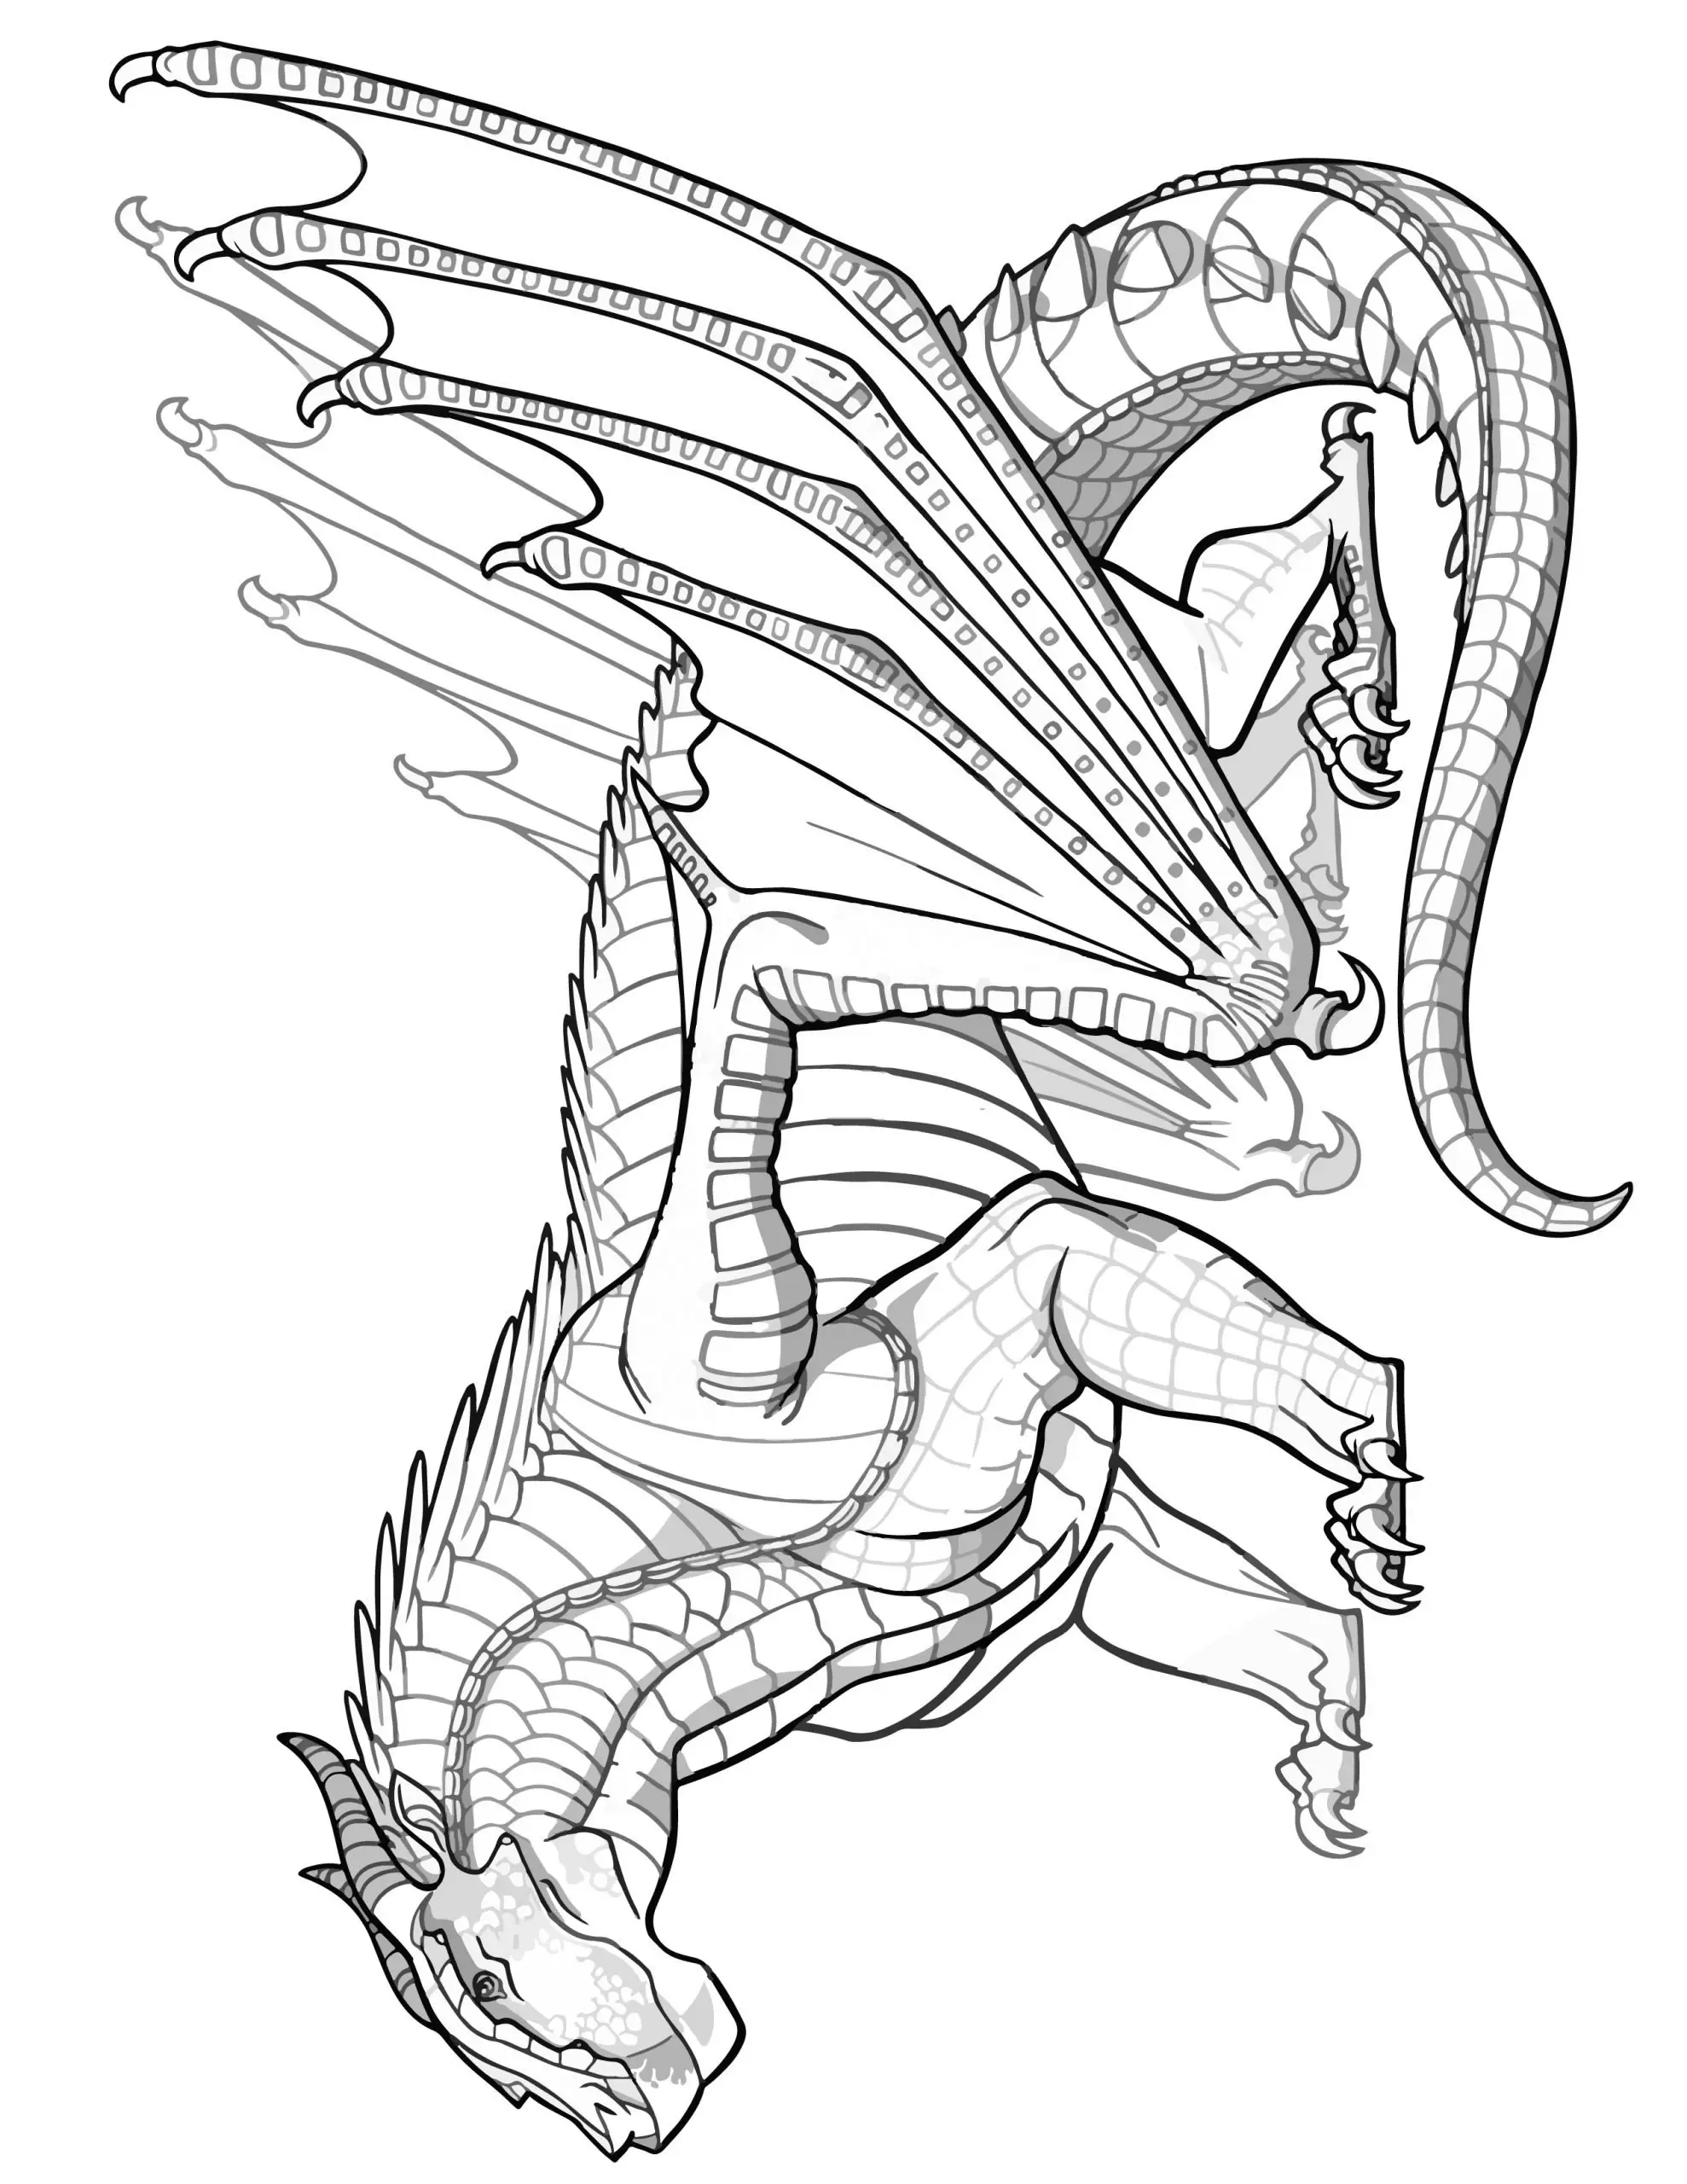 Wings of fire dragon coloring pages